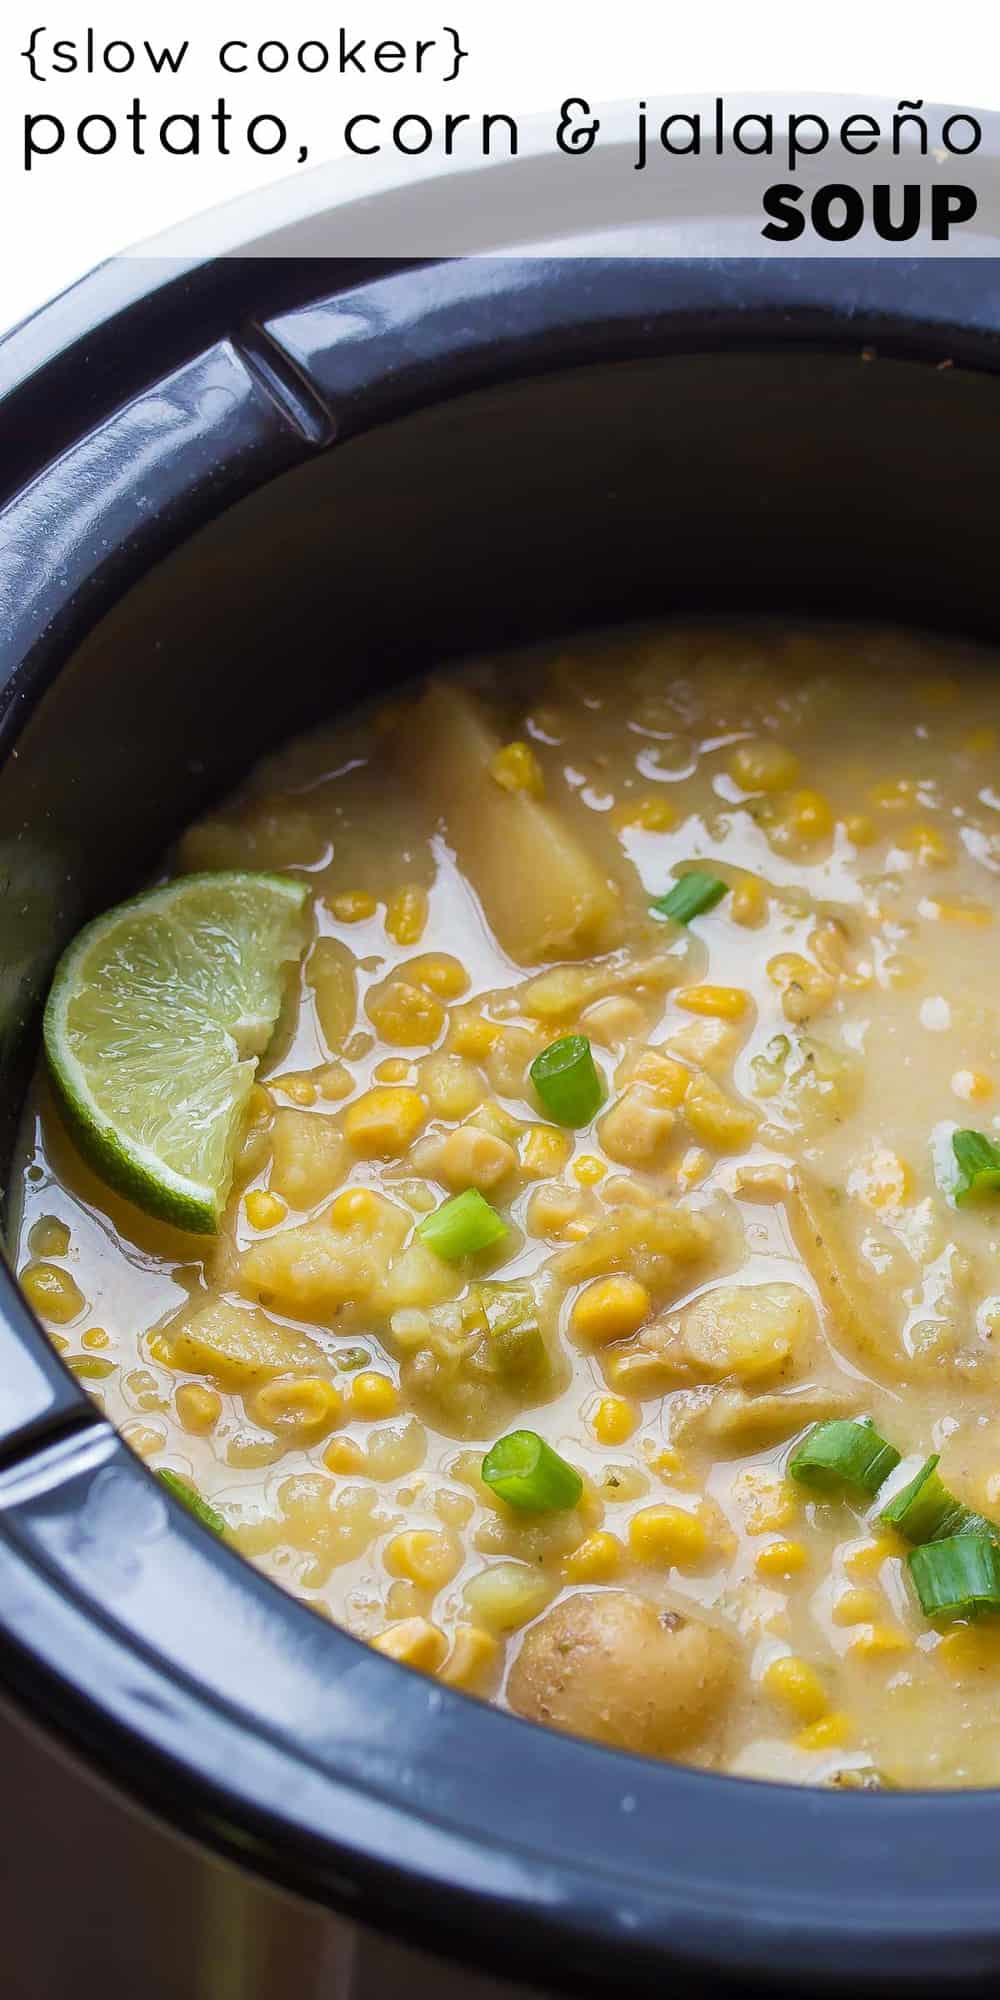 This slow cooker potato corn soup is an easy and deceptively healthy recipe that gets a boost of creaminess from Almond Breeze almond beverage, and a touch of heat from jalapenos! Only 160 calories/bowl!